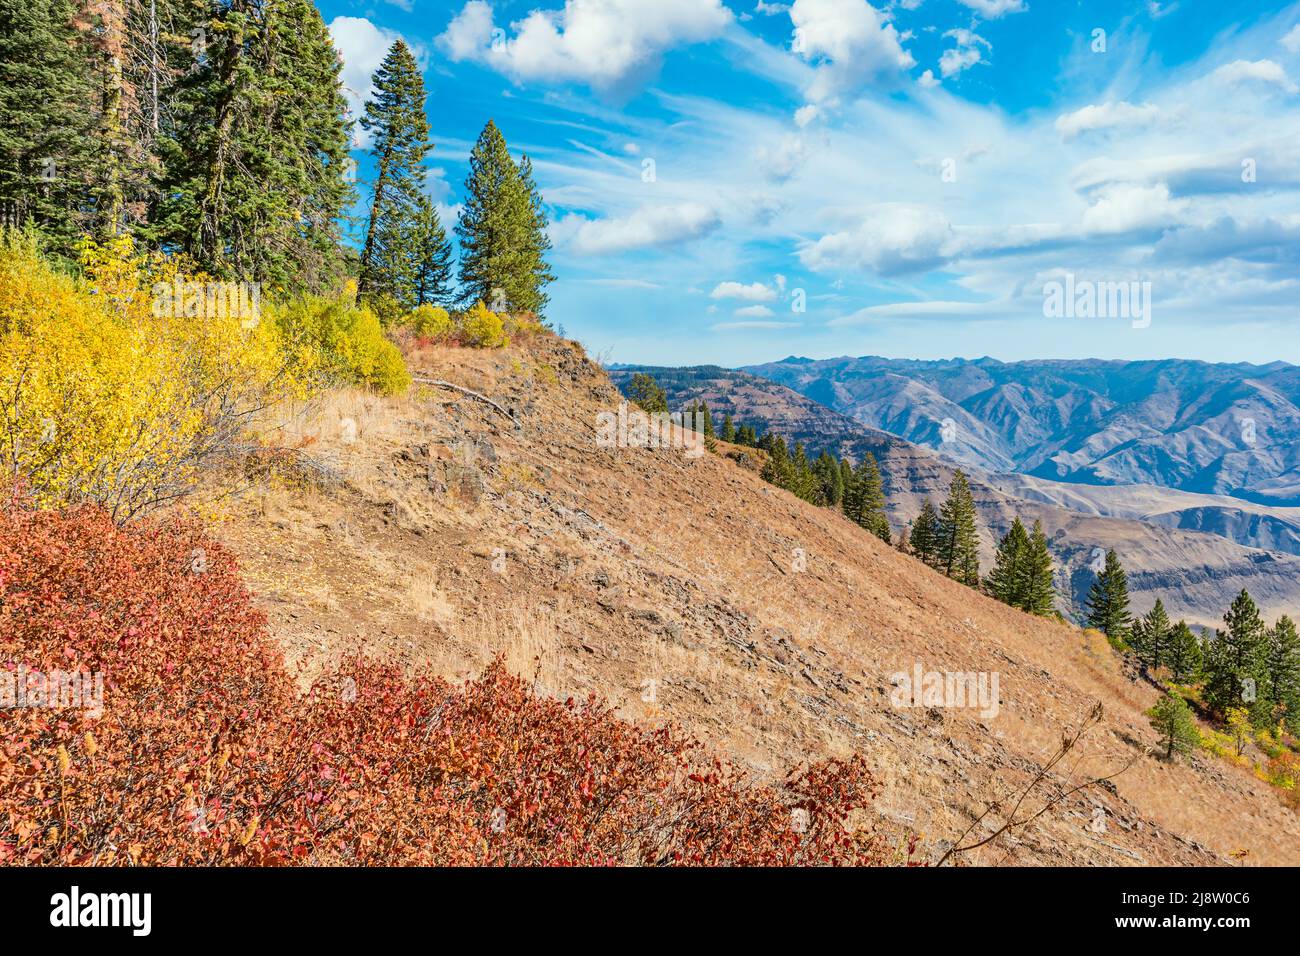 Landscape at Hells Canyon Overlook in Oregon USA on a sunny autumn day. Stock Photo